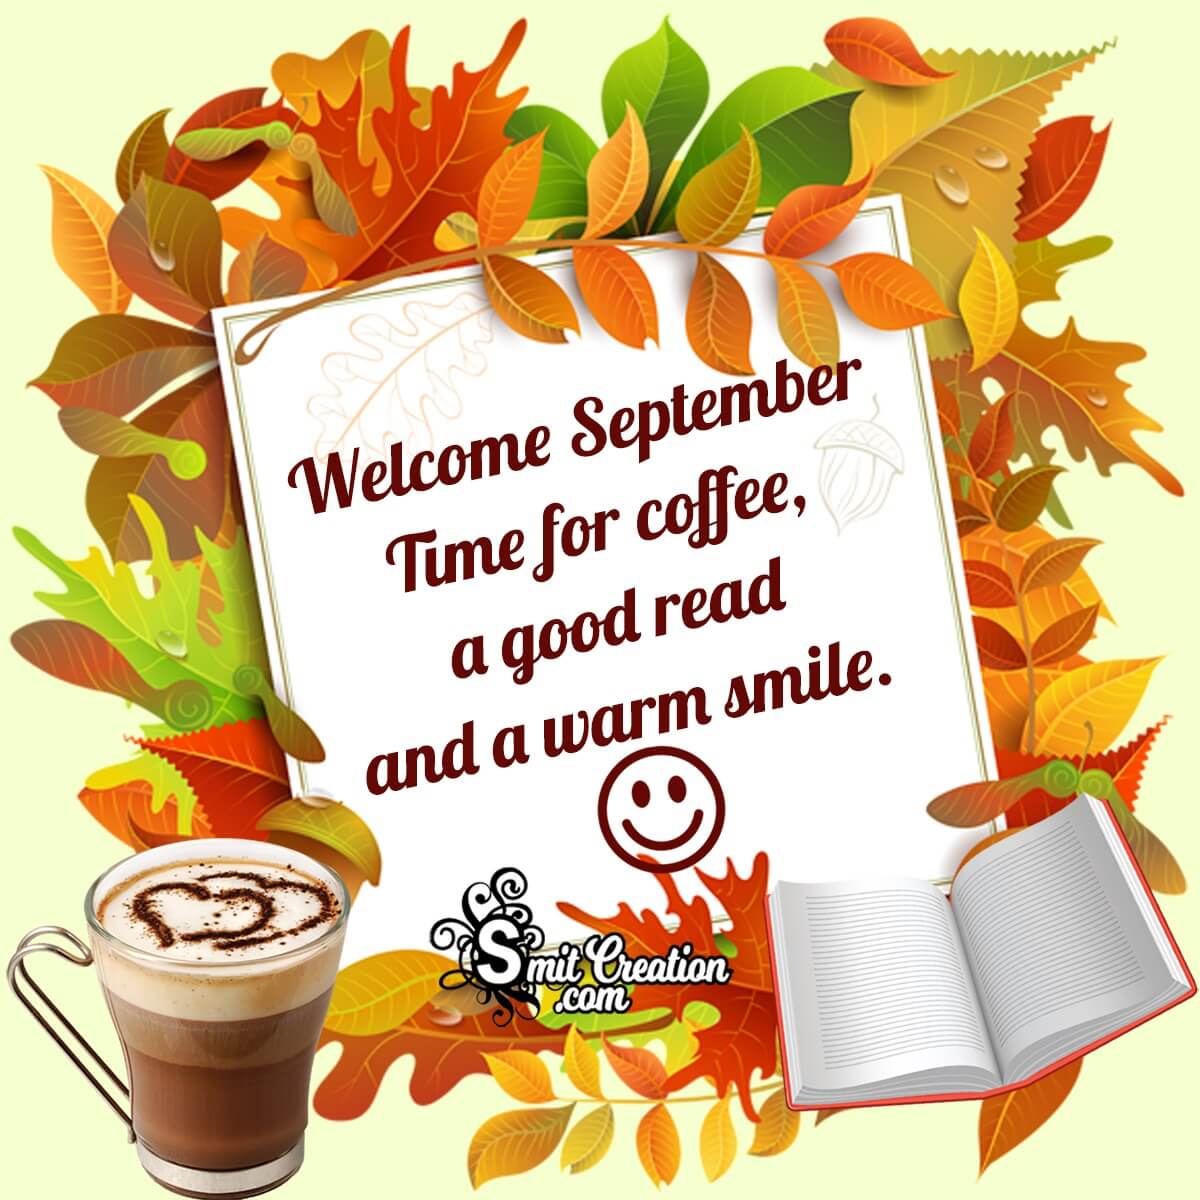 Welcome September Time For Coffee